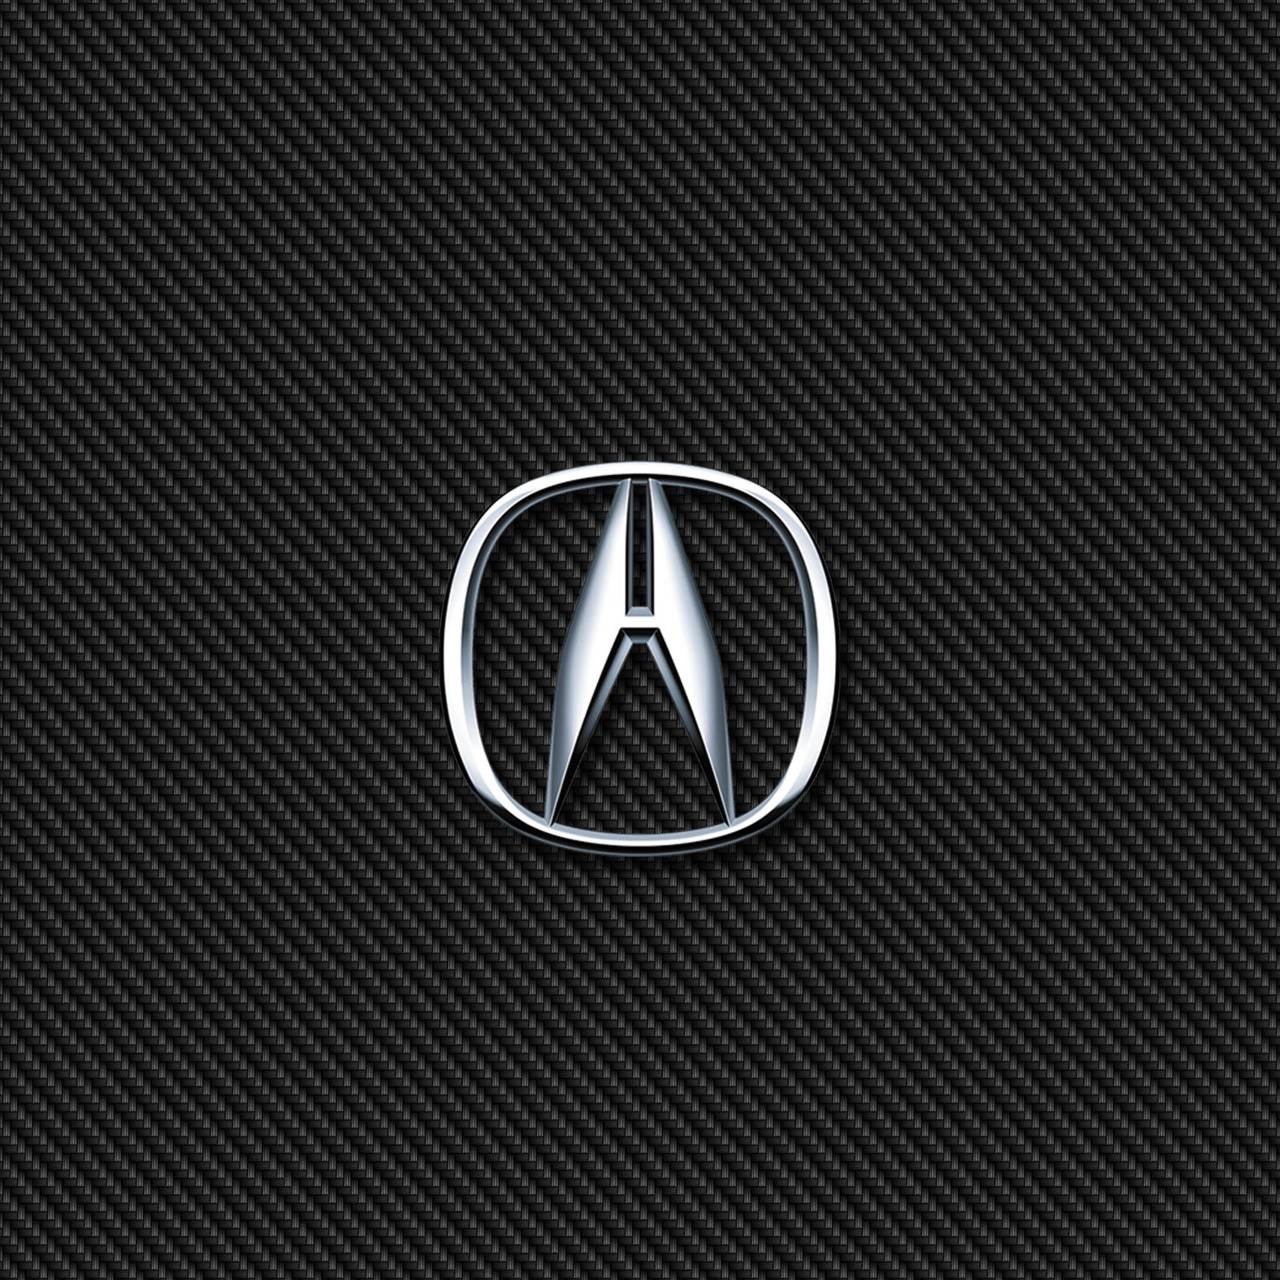 Acura Logo Wallpapers - Top Free Acura Logo Backgrounds - WallpaperAccess